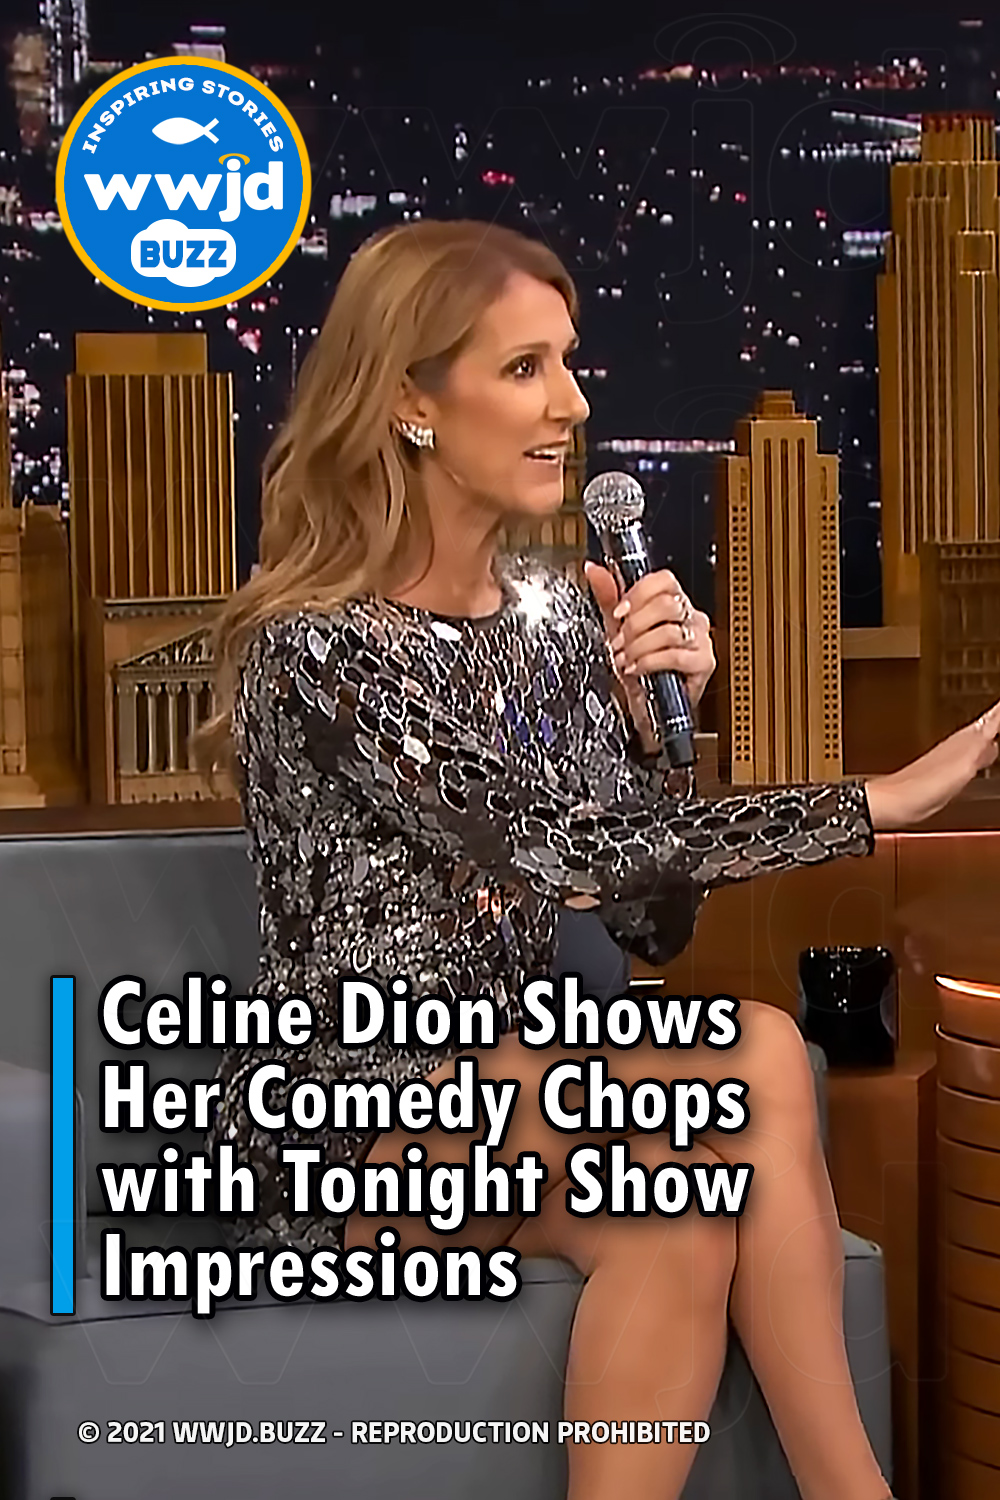 Celine Dion Shows Her Comedy Chops with Tonight Show Impressions